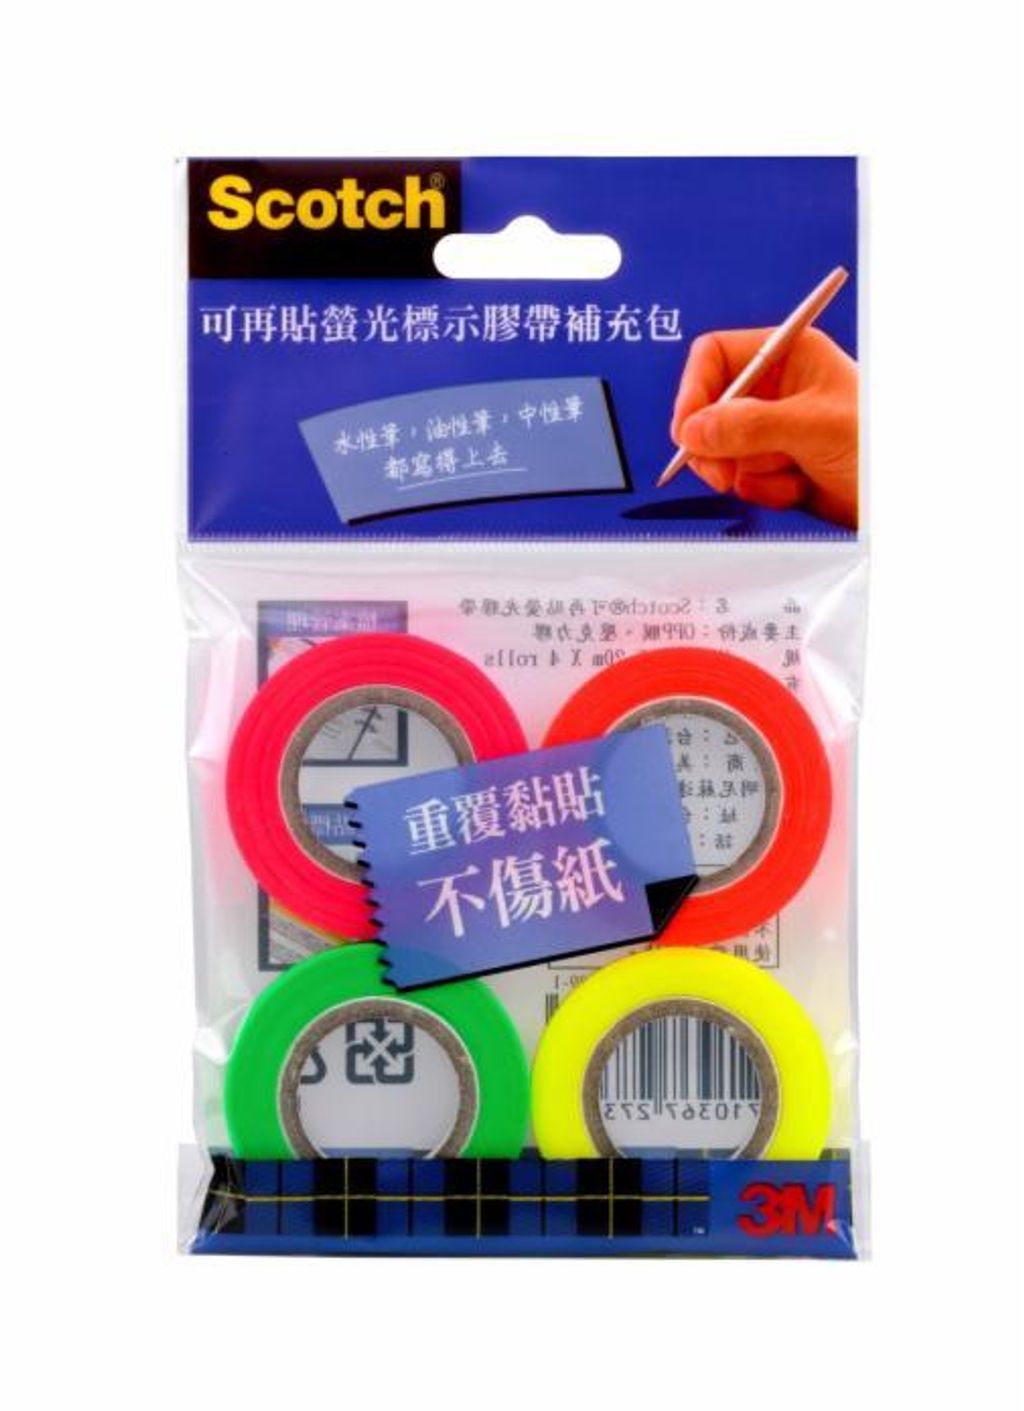 3m-scotch-repositionable-tape-refill-pack-4-rolls-812r4